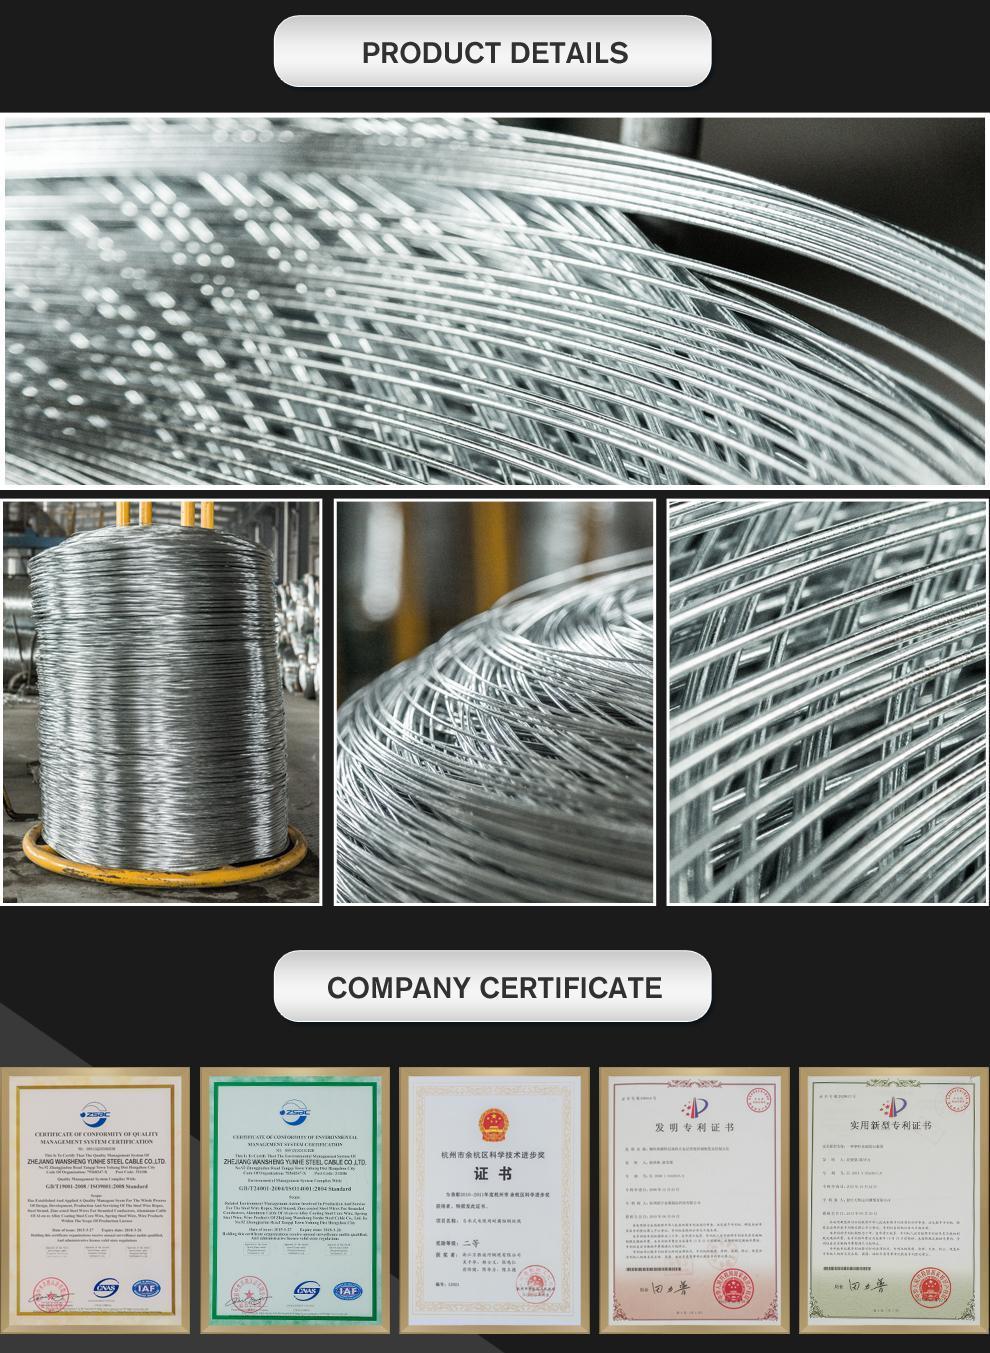 Electric Galvanized Stay Wire 7/0.4 mm Zinc Coated Twisted Steel Wire 1*7 Stranded Wire